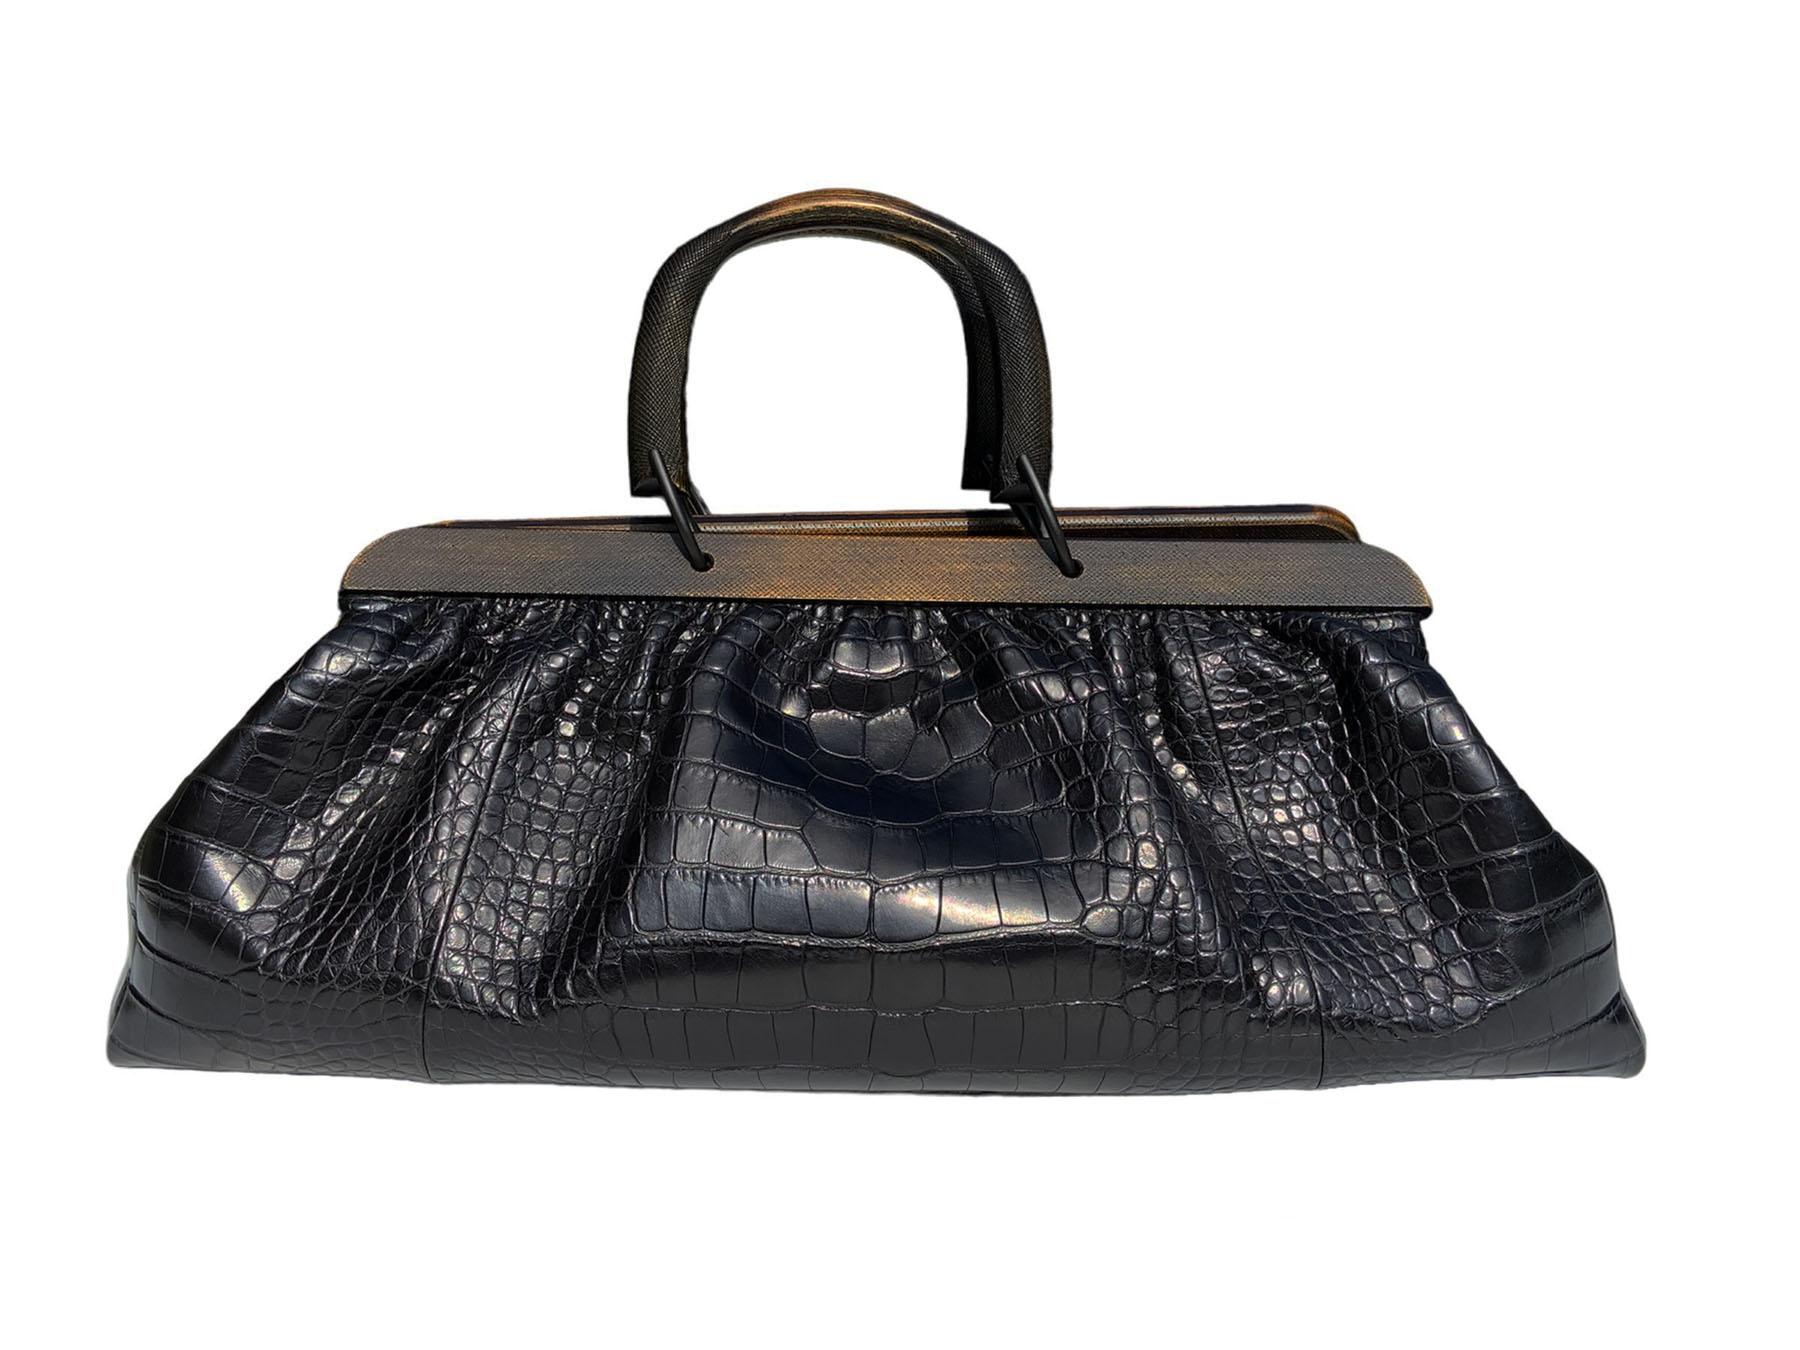 Outrageously gorgeous Gucci Doctors Large Bag! From none other, than the fabulous Tom Ford. 
Made of genuine crocodile skin. Two wood handles with 4'' drop. Closes with a belt on top. 
Lined in black leather. Hardware Matte Black. Interior has one